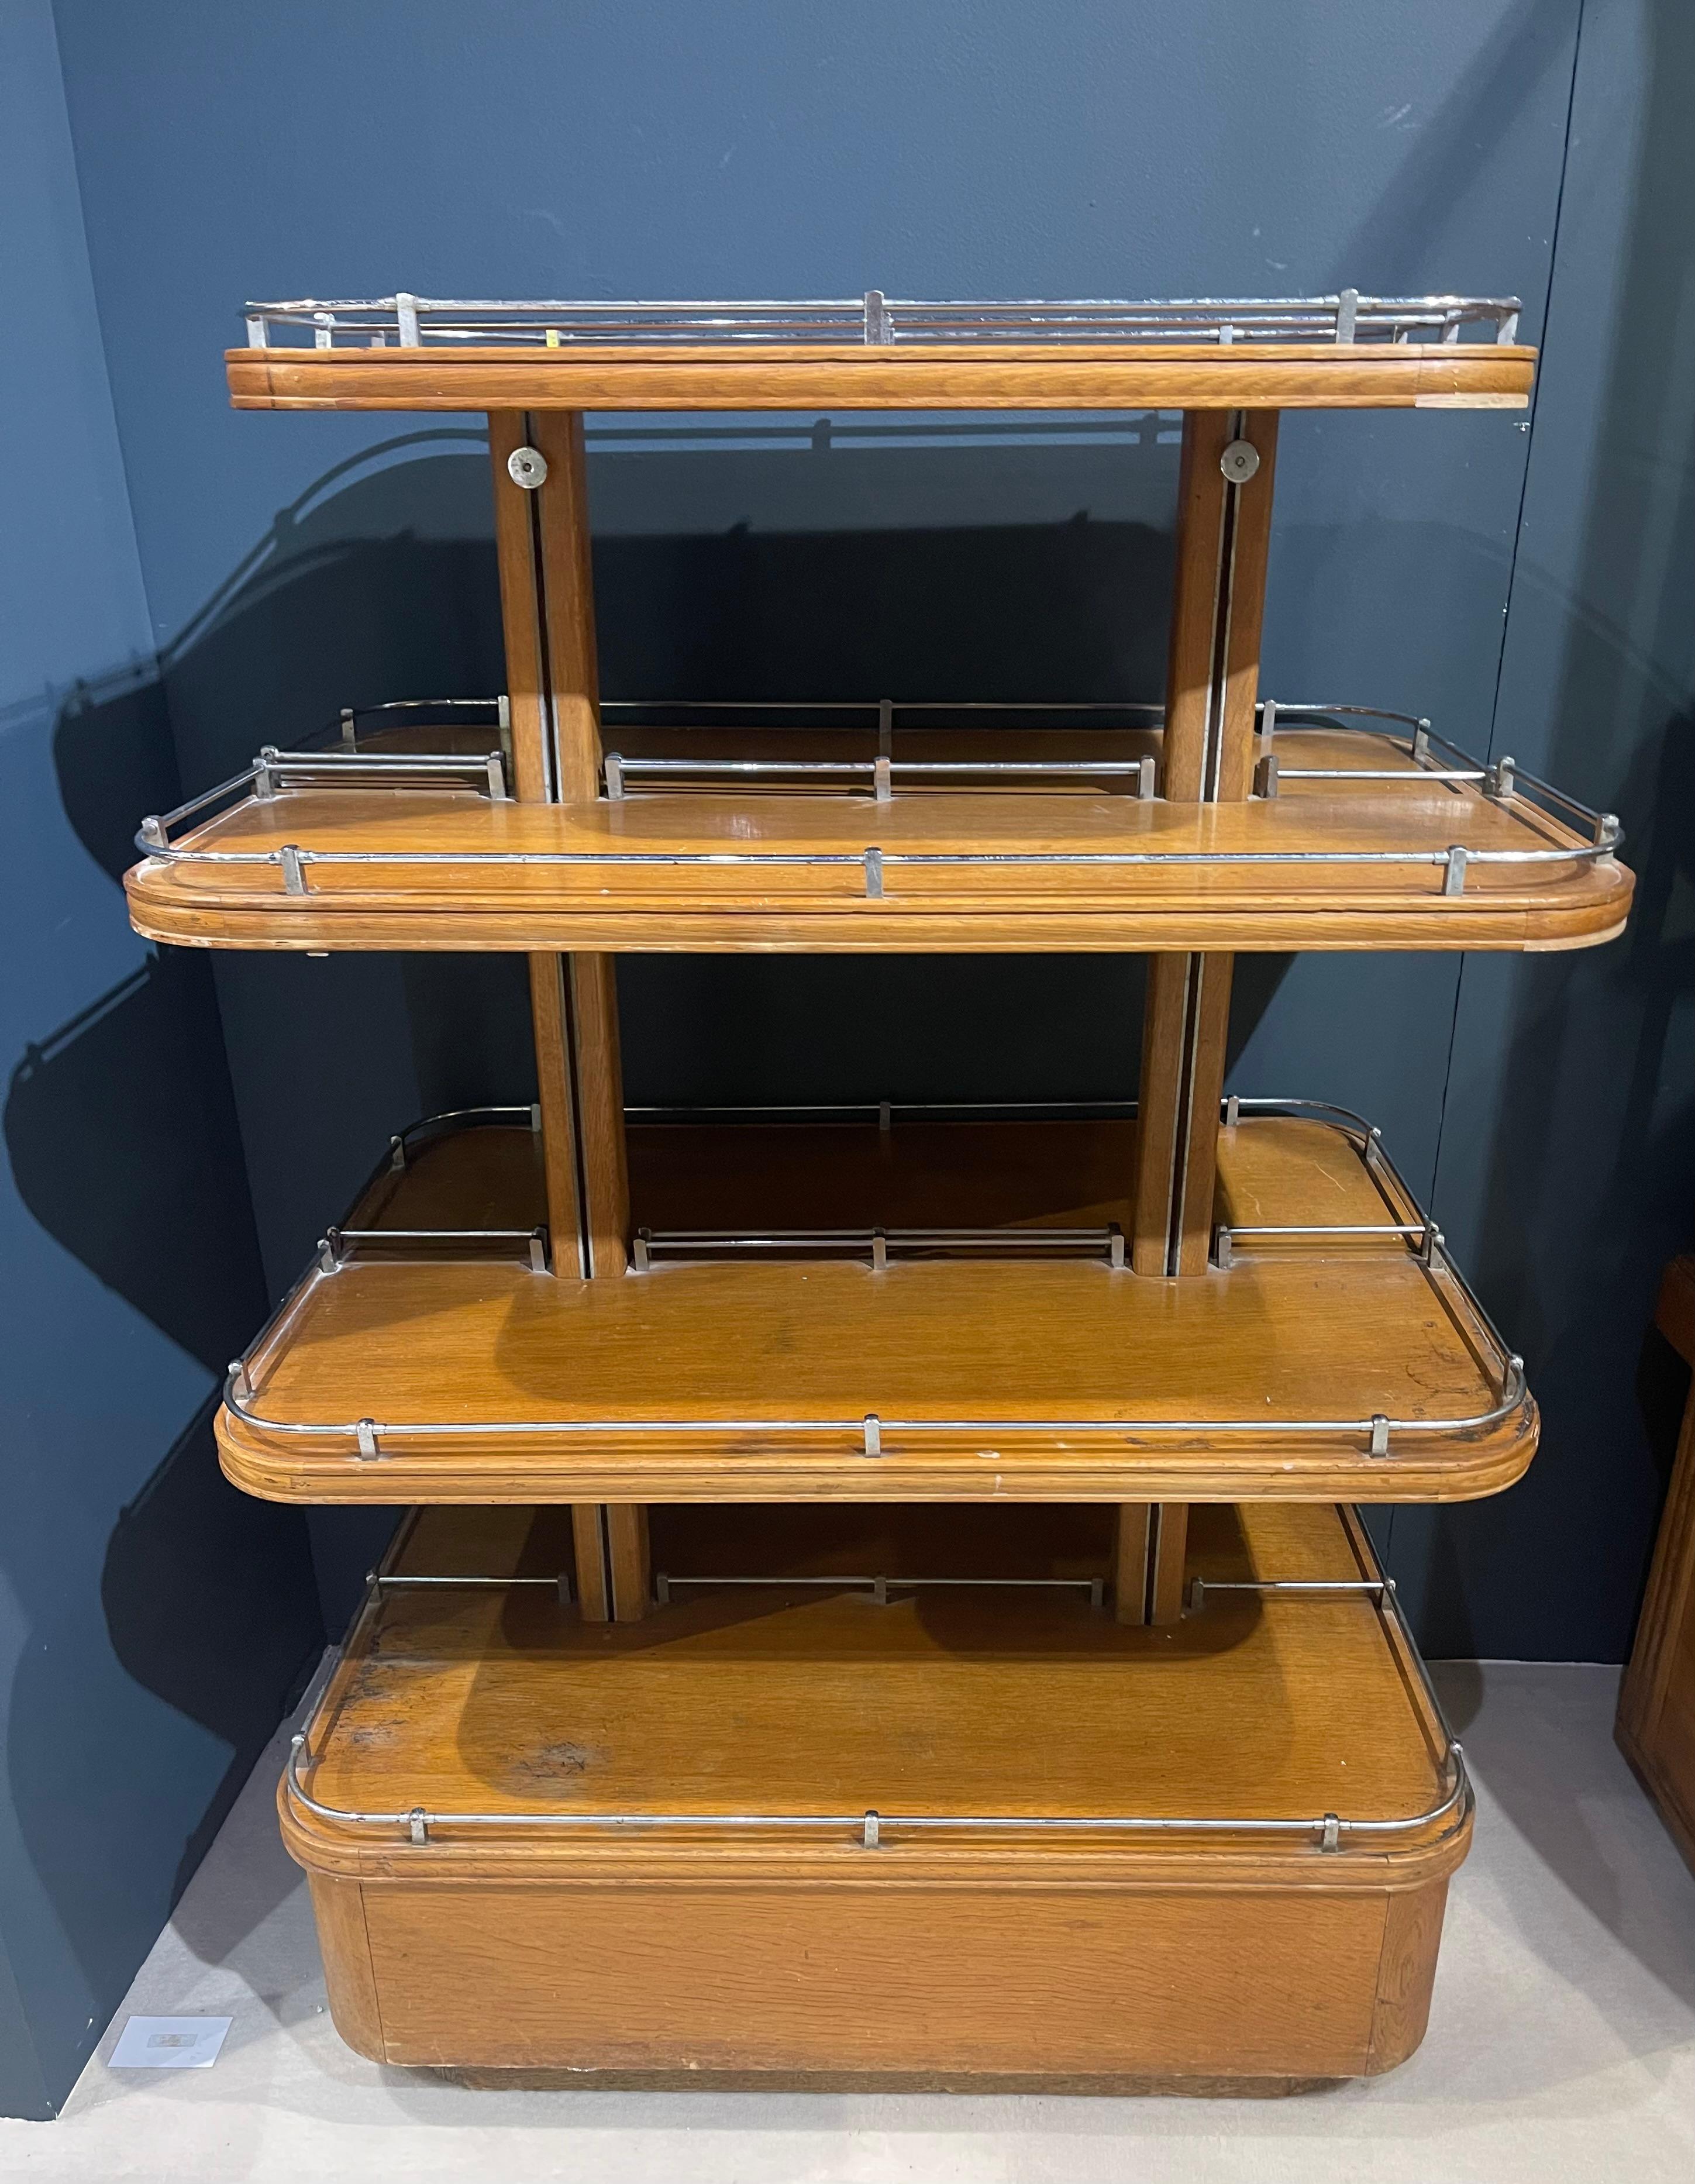 19th Century store shelf.
This rare piece of furniture in light wood consists of 4 removable shelves that can be detached into two per floor, which makes it functional and practical. Thanks to its wheels the furniture is easily steerable.
This